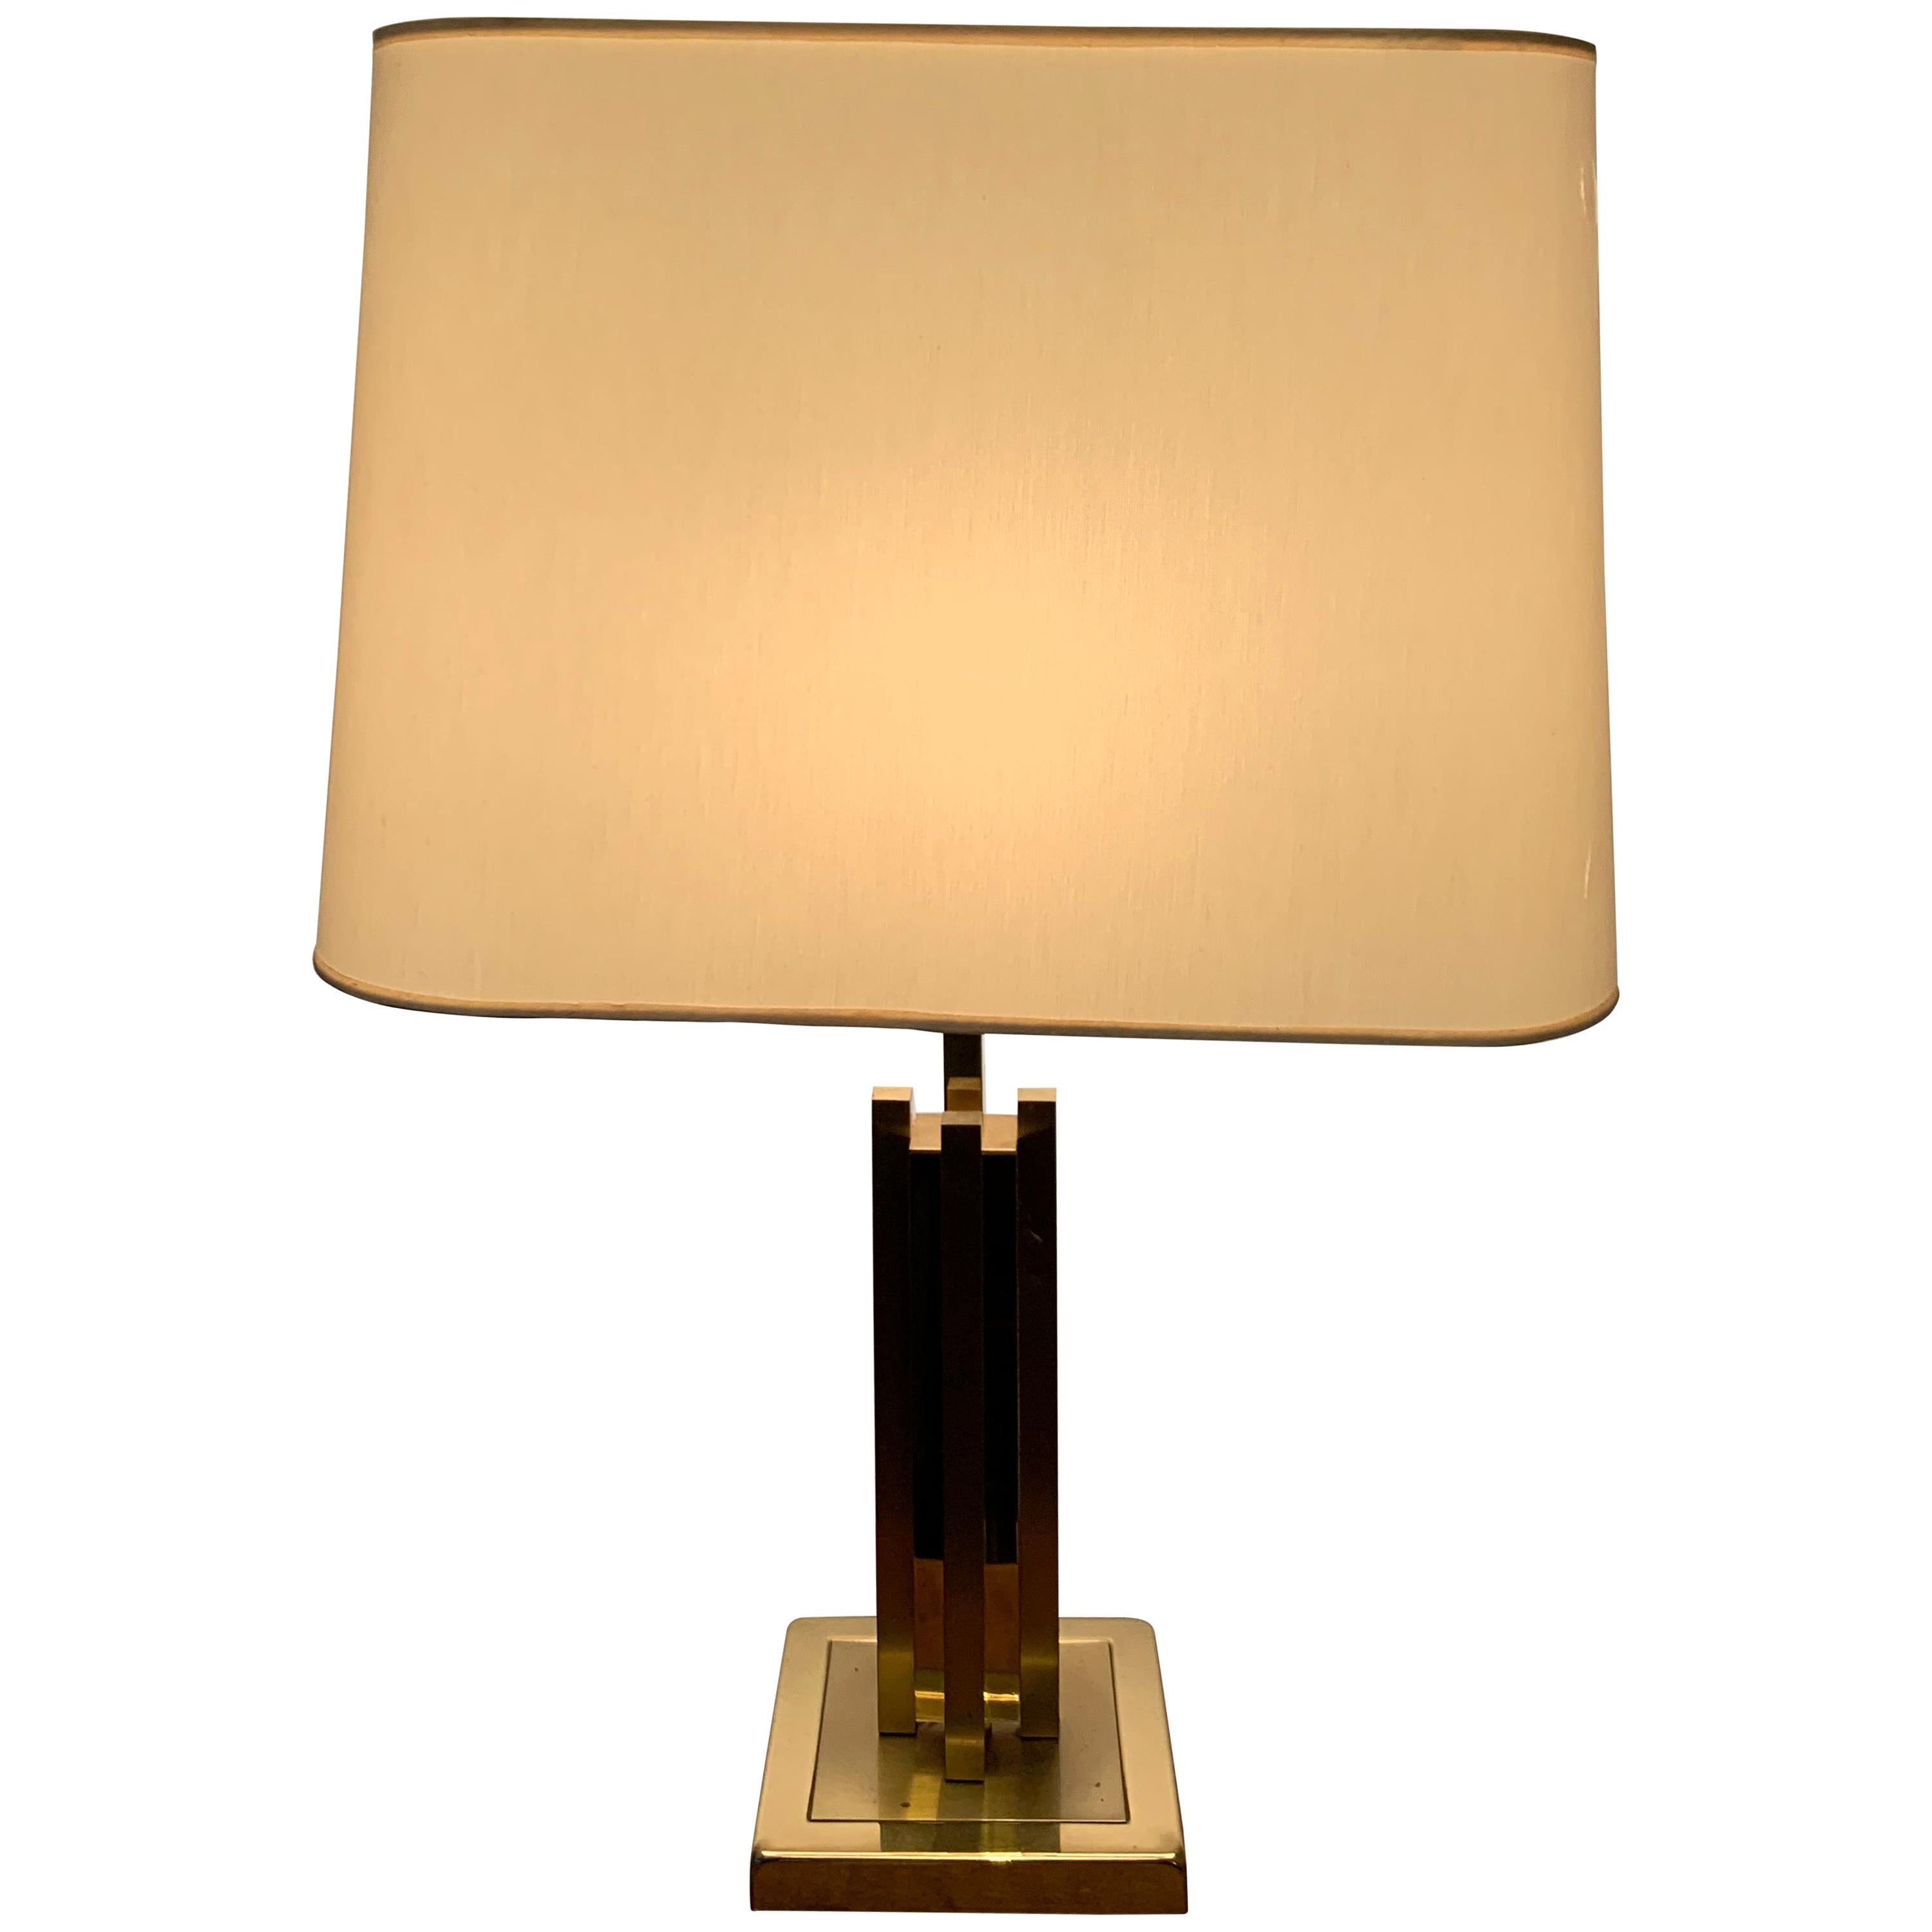 20th Century Regency Gold Silver Table Lamp by Willy Rizzo for Lumica, 1980s